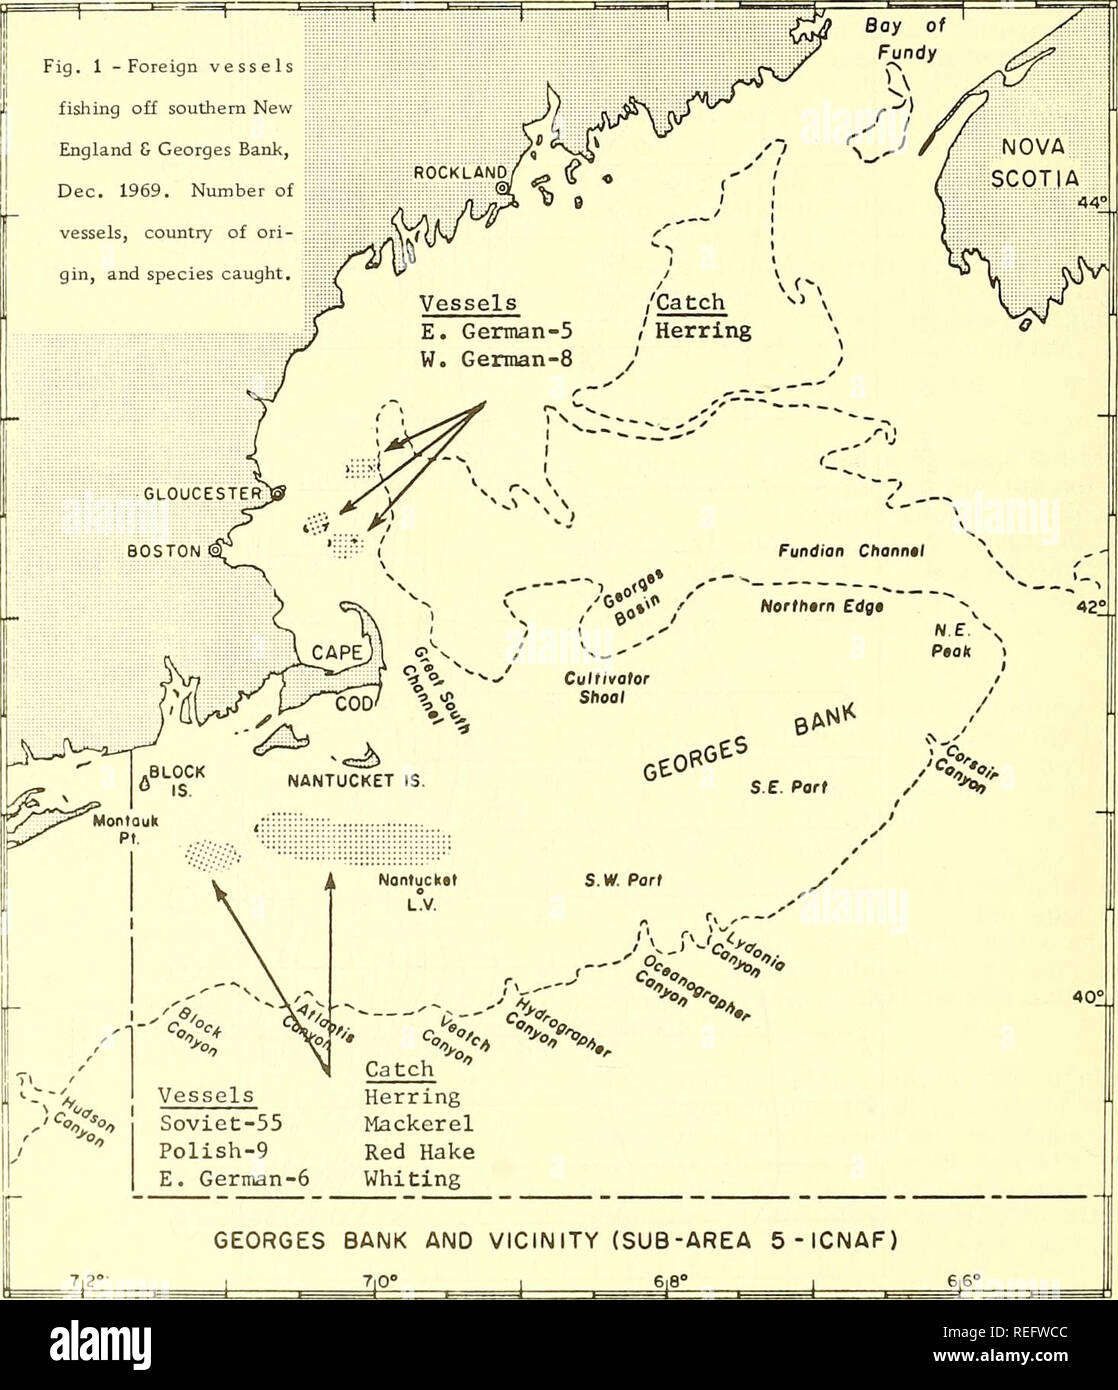 . Commercial fisheries review. Fisheries; Fish trade. FOREIGN FISHING OFF U.S., DECEMBER 1969 NORTHWEST ATLANTIC (Fig. 1) InDecember 1969, 80 vessels were sighted (105 in Nov. 1969; 36 in Dec. 1968). USSR: 36 medium side trawlers, 11 factory stern trawlers, 1 factory base ship, 4 re- frigerated carriers, 2 tankers, 1 tug. Most were along 30-fathom curve south of Block Island and Nantucket, a few on Georges Bank. (50 in Nov. 1969; 29 in Dec. 1968). Poland: 6 stern and 3 side trawlers (17 in Nov. 1969; 6 in Dec. 1968). West Germany: 8 freezer stern trawlers (4 in Nov. 1969; none in Dec. 1968). G Stock Photo